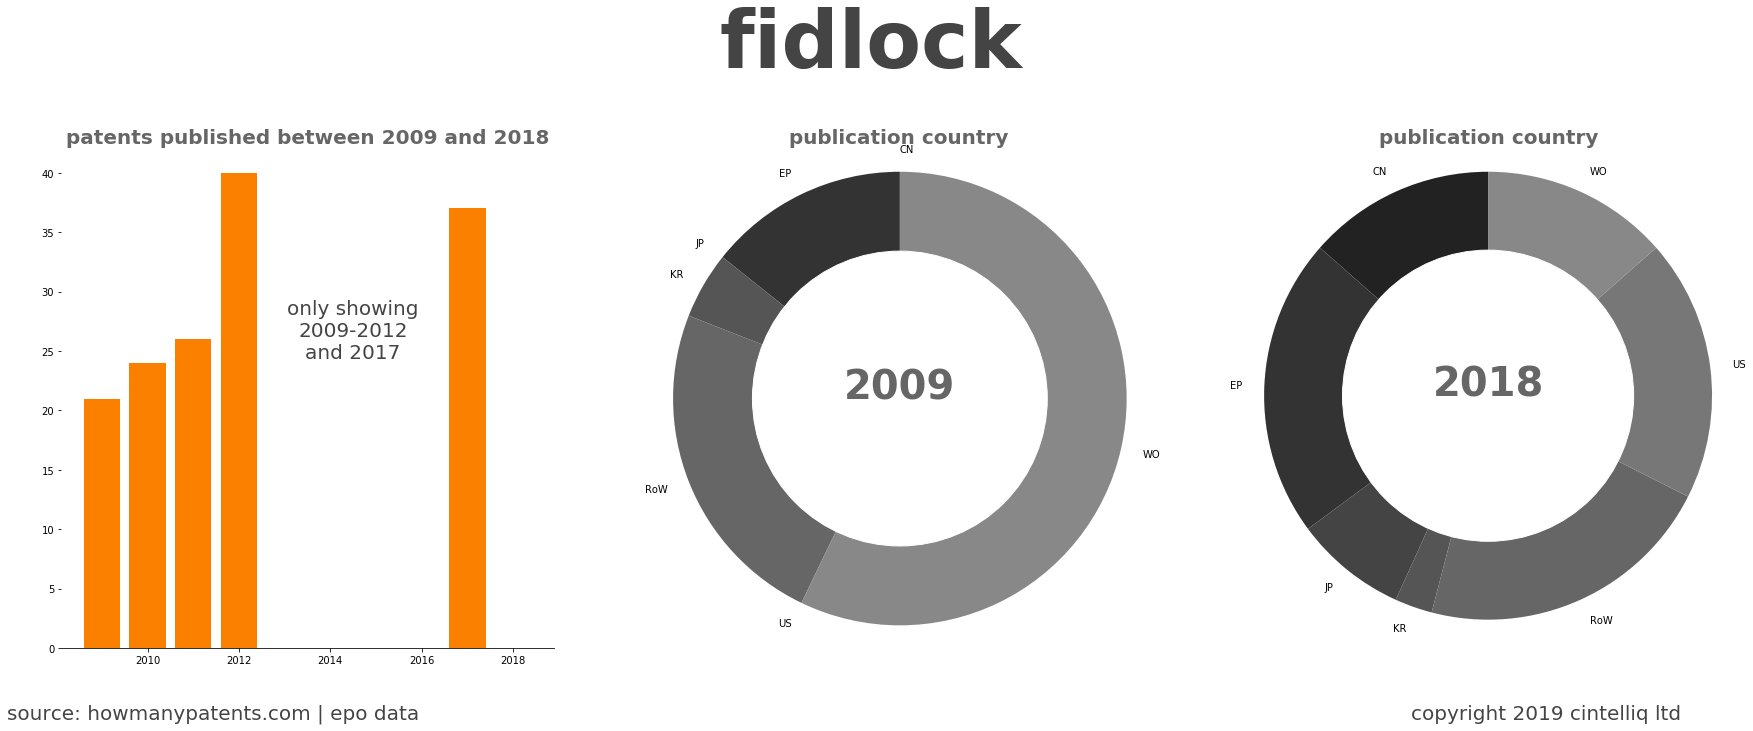 summary of patents for Fidlock